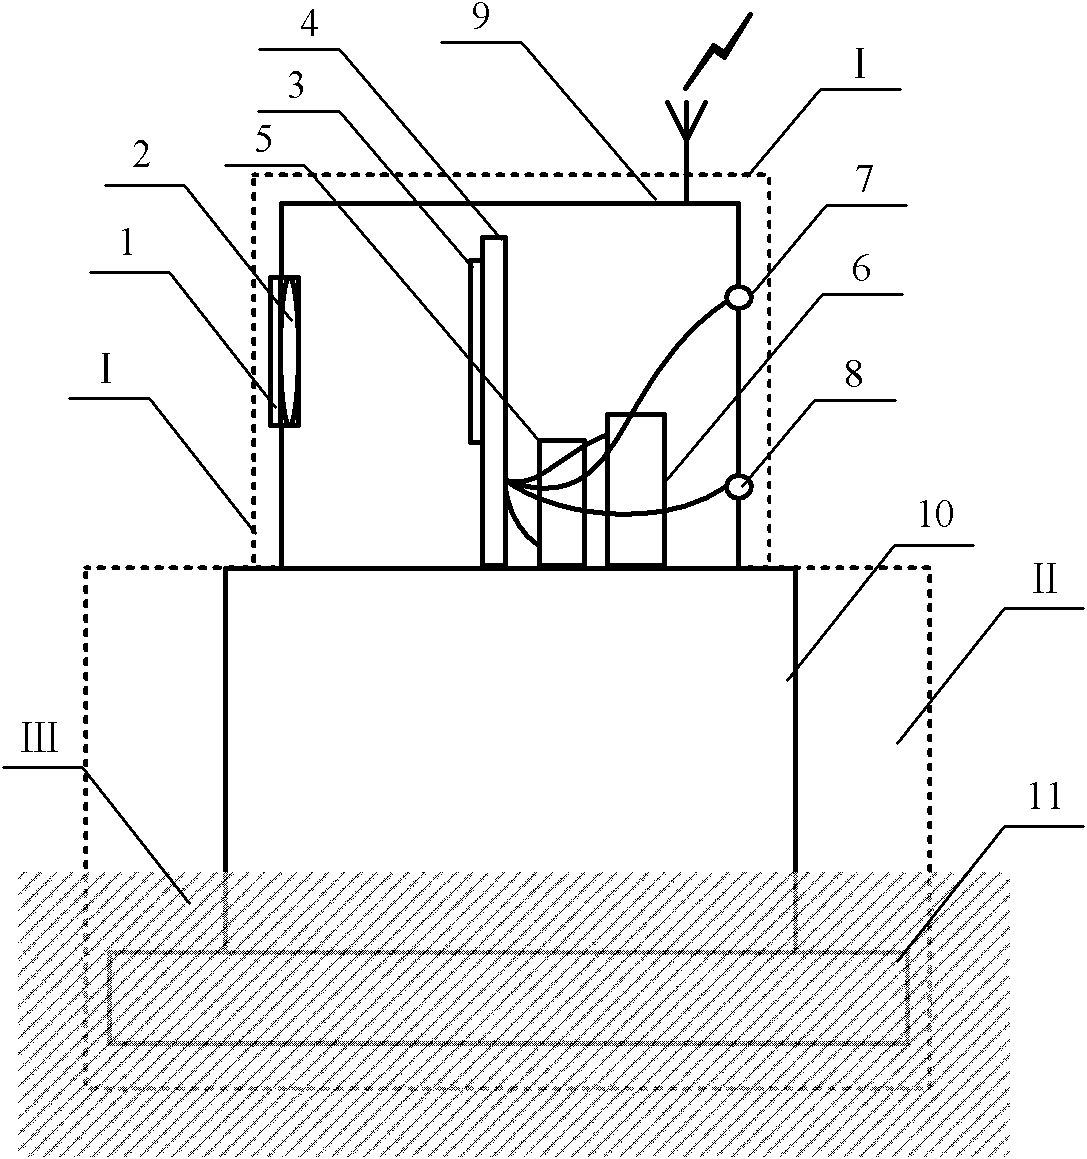 Remote multi-point monitoring system and method for subgrade surface settlement